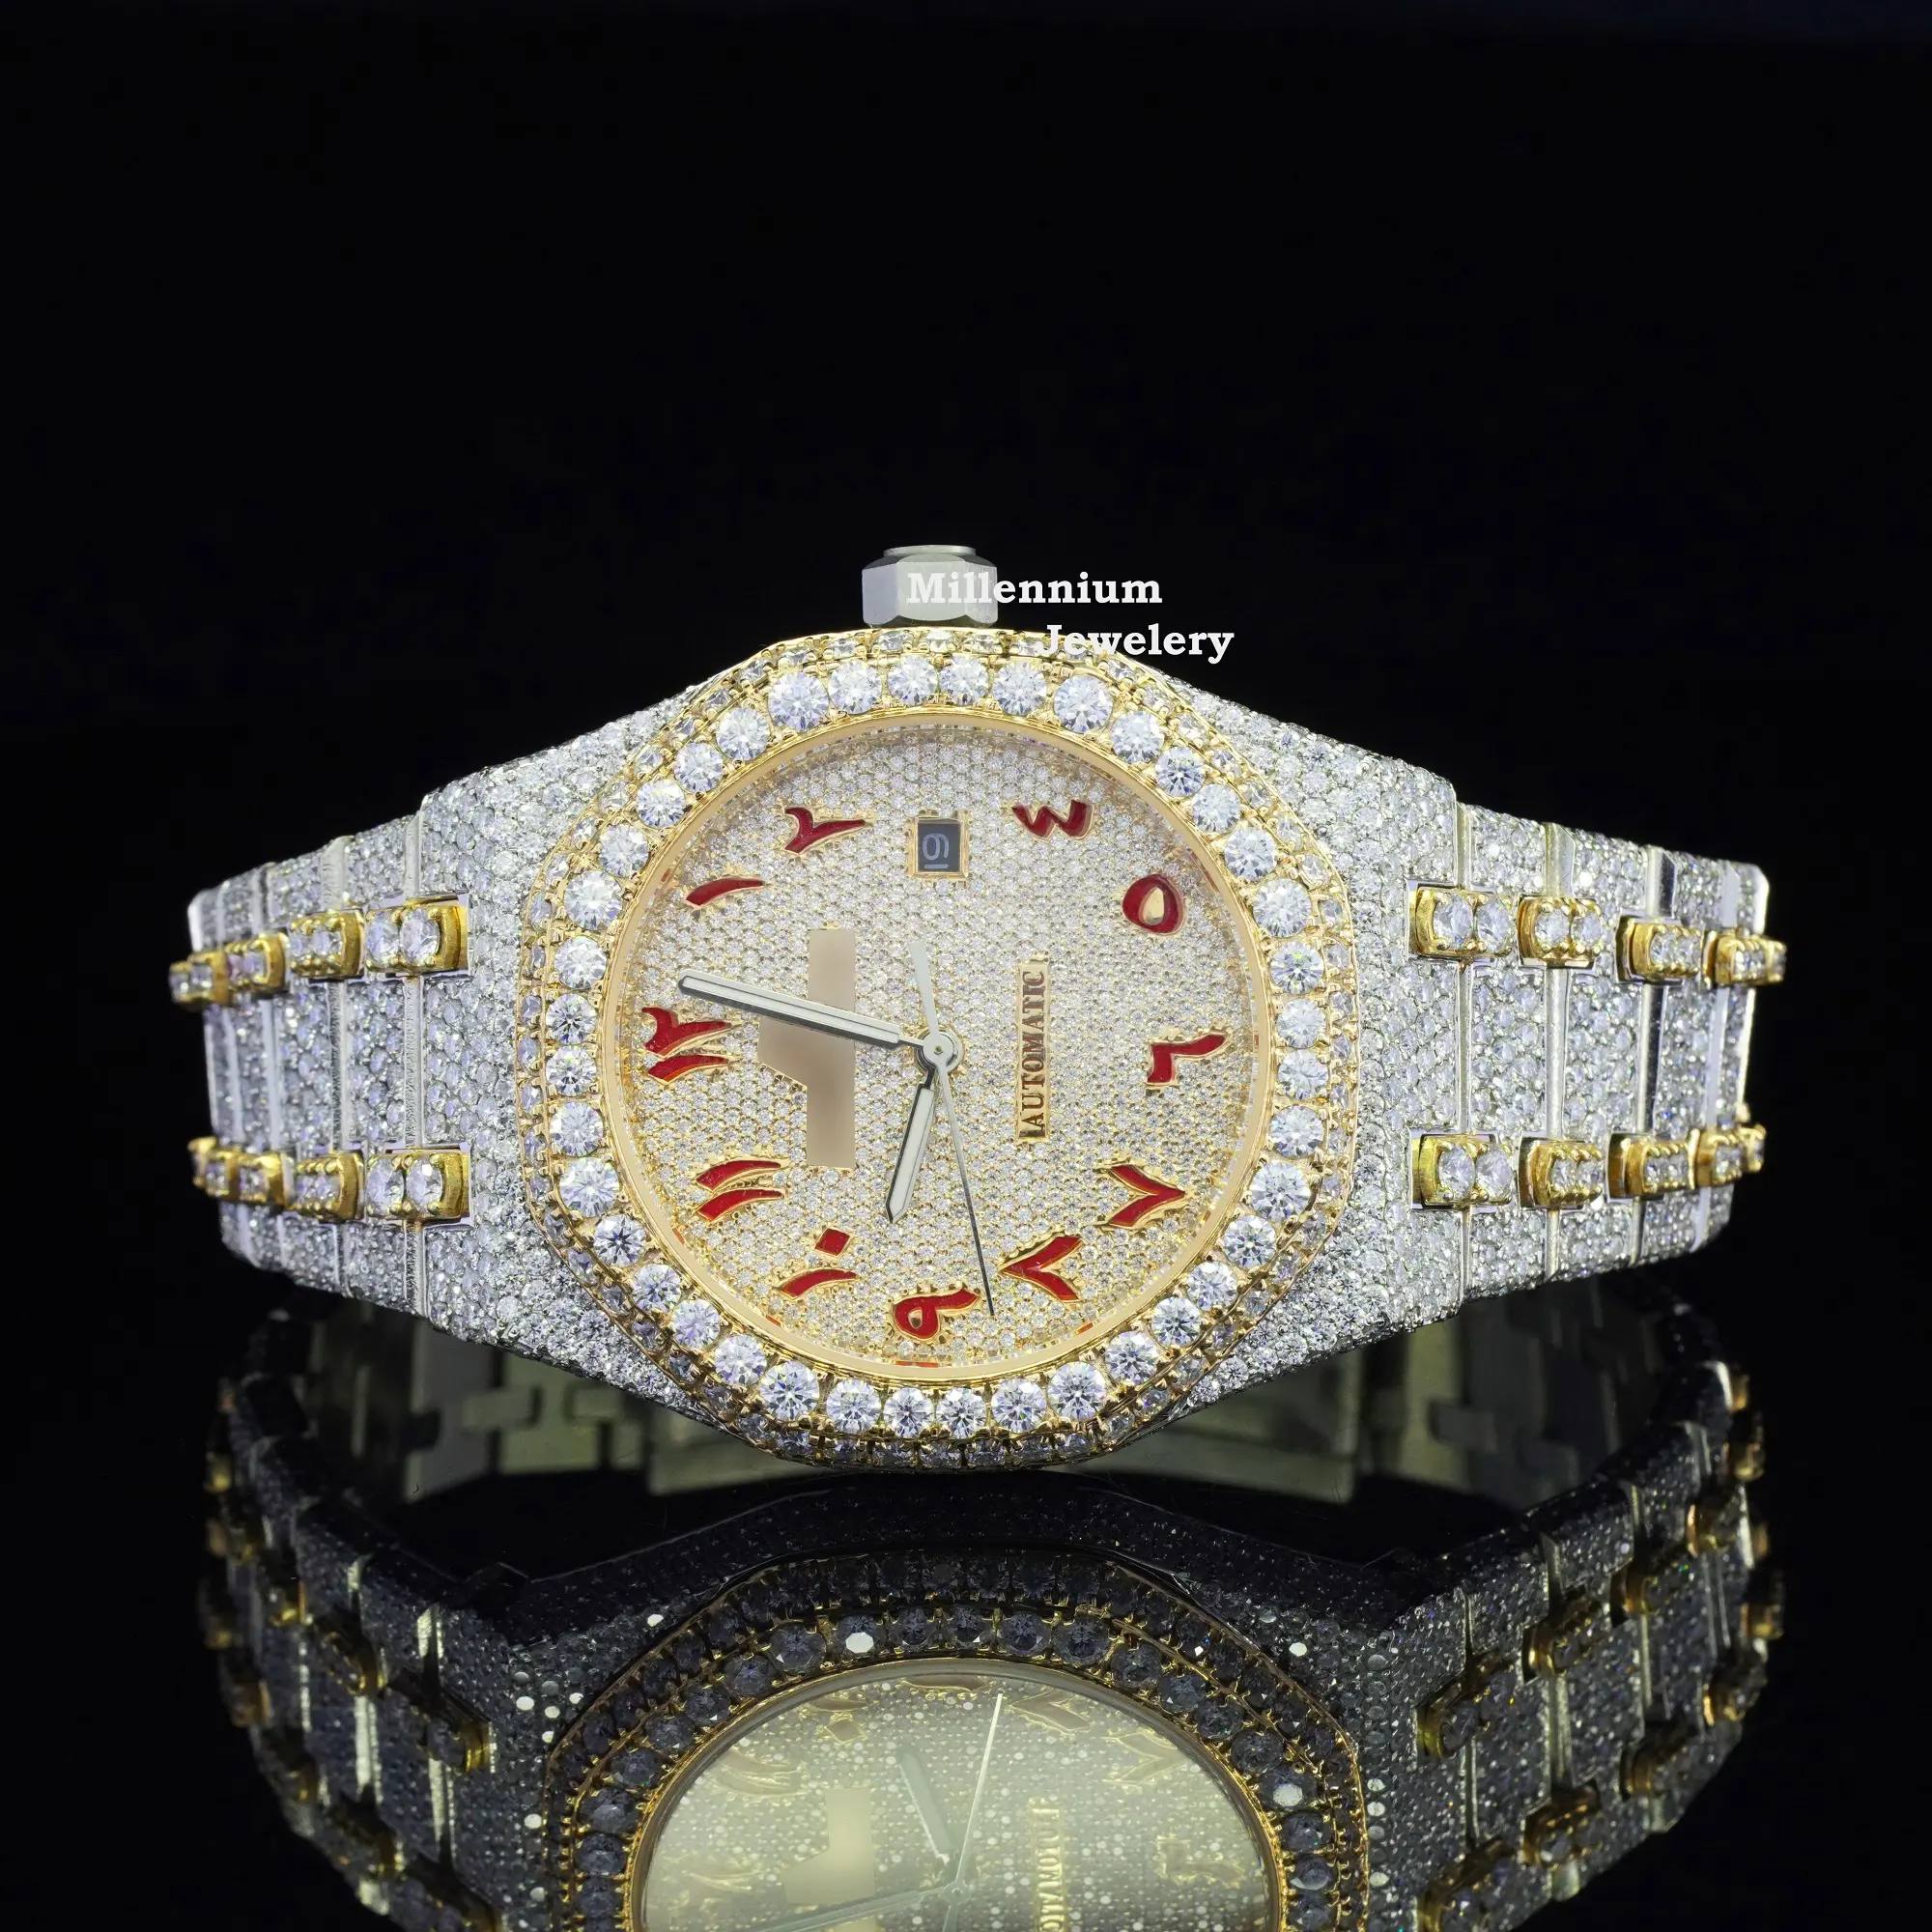 Top Quality Branded Iced Out Moissanite Watch Stainless Steel Watch Hip Hop Watch at Lowest Price From Indian Exporter